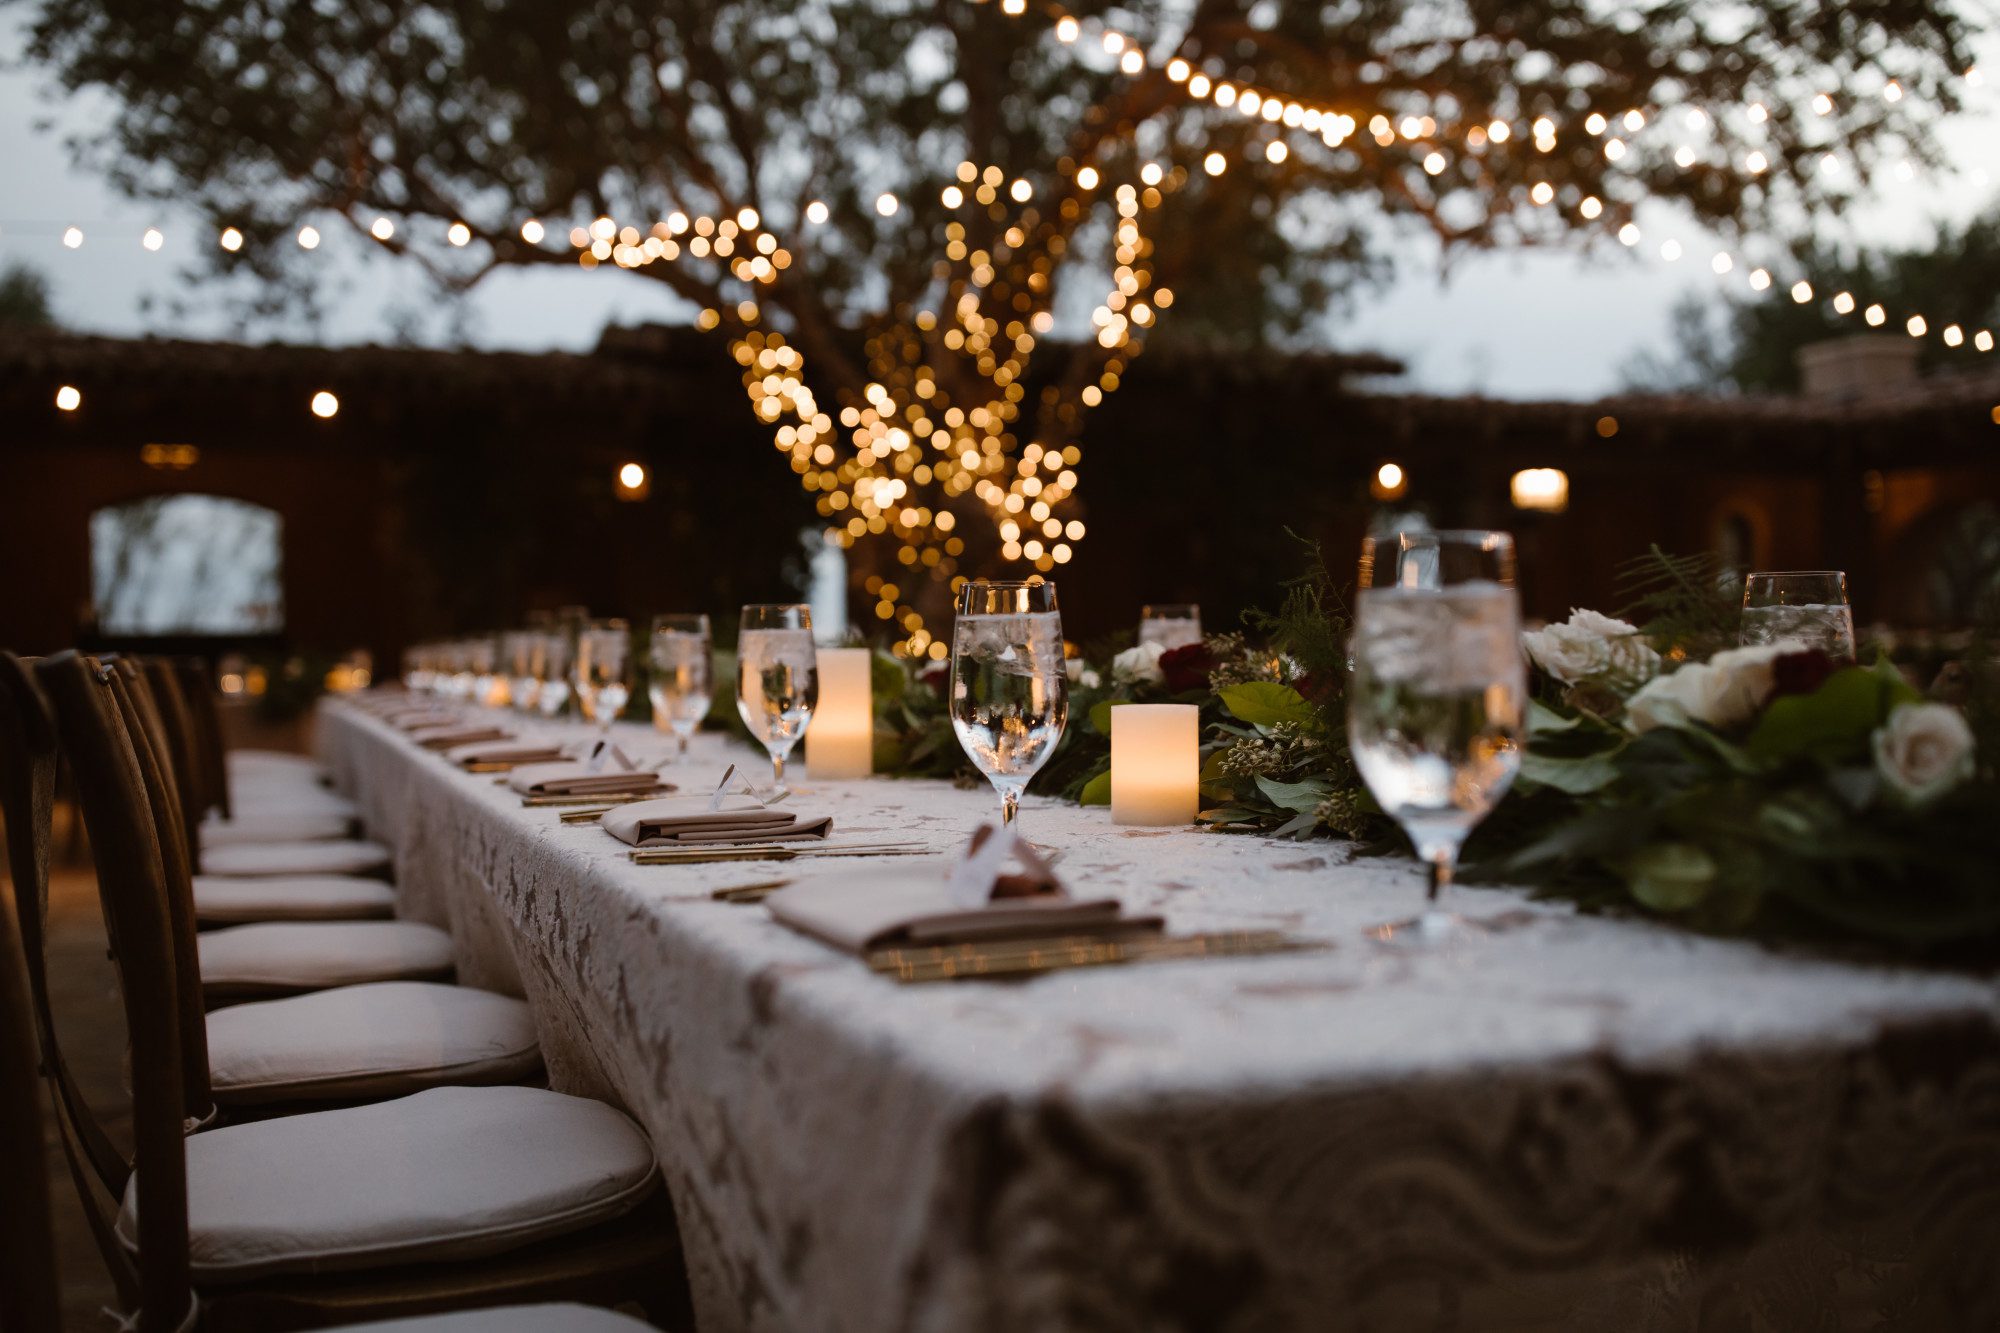 A Dreamy Outdoor Dinner Setting